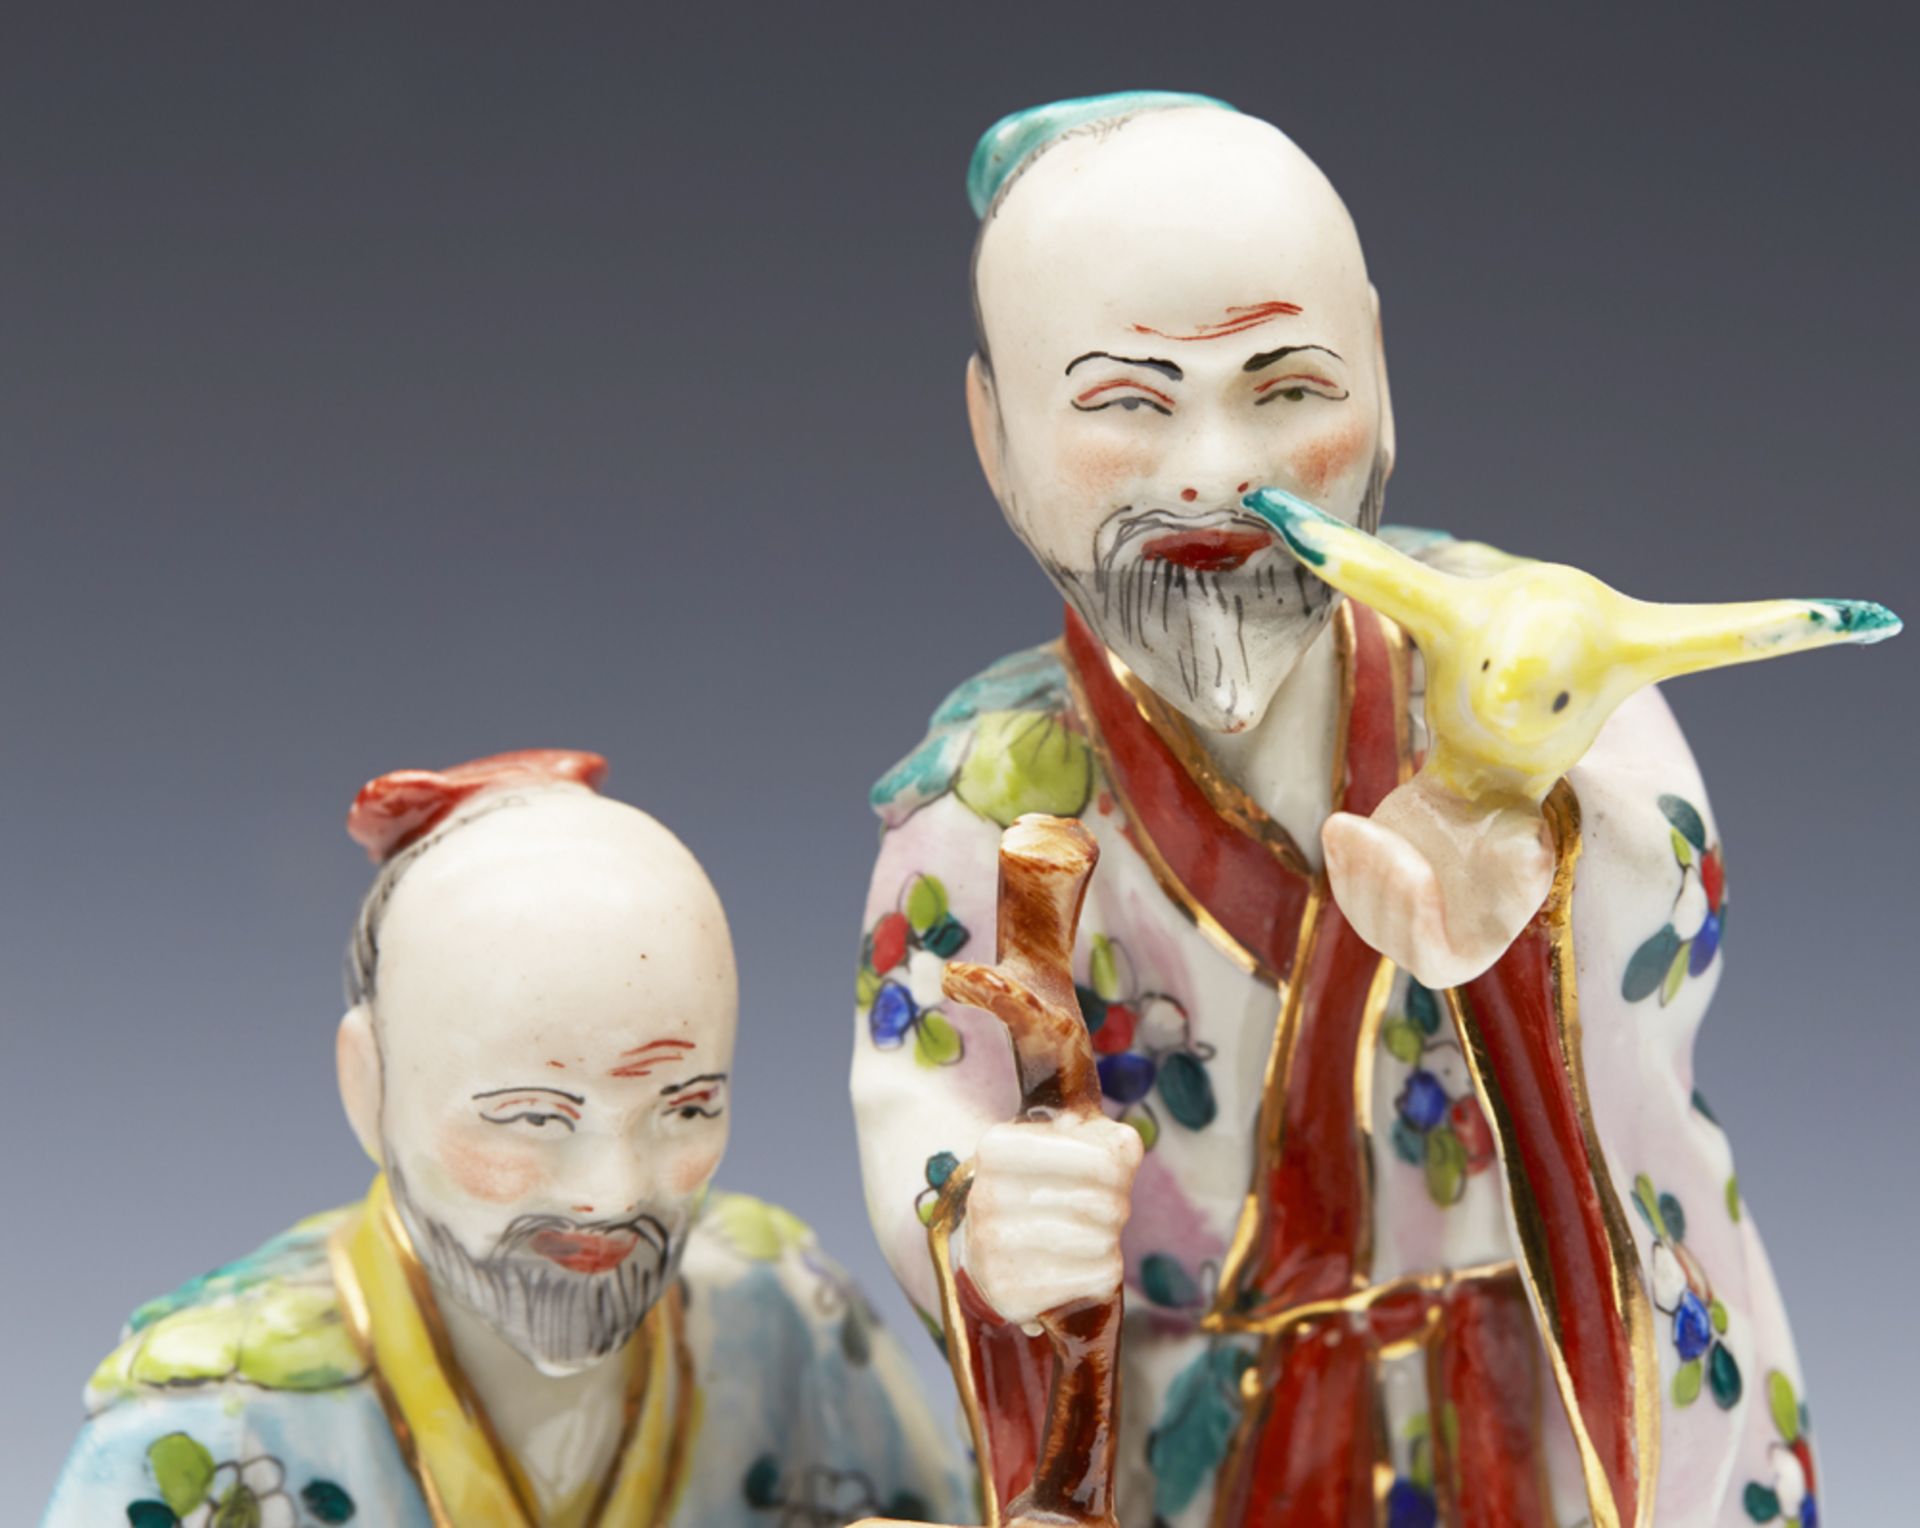 ANTIQUE CONTINENTAL PORCELAIN FIGURE OF TWO CHINESE ELDERS 19TH C. - Image 12 of 12